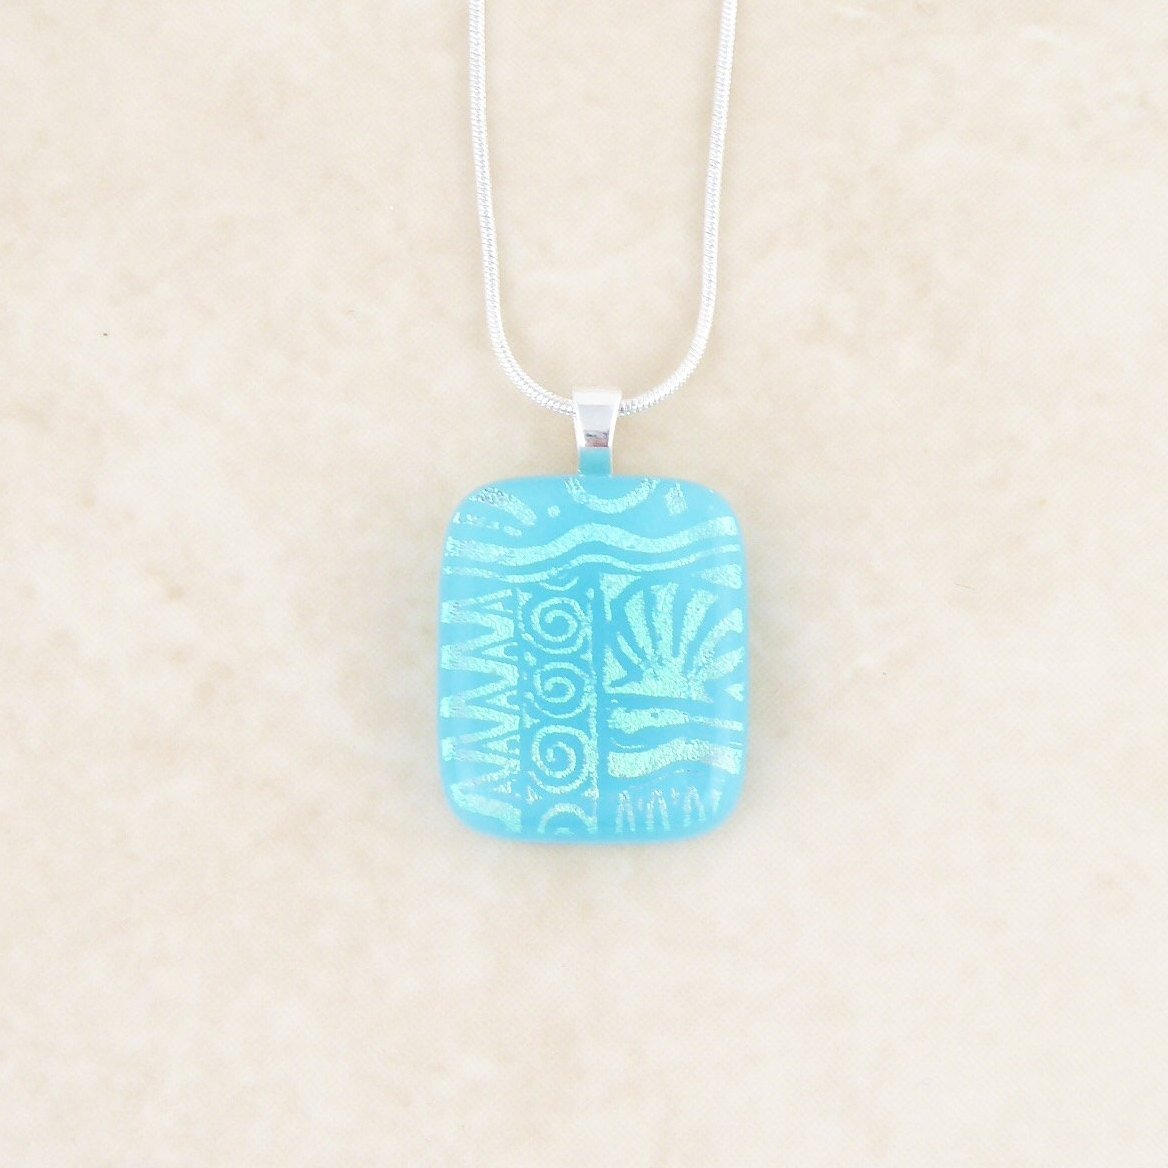 New pendant necklace in my #Etsy shop with solid silver bail. etsy.me/2IcUe8B #jewellery #necklace  #glass #dorsetteam #dichroicnecklace #fusedglass #handmade #dichroicglass #blue #fusedglassnecklace #pendantnecklace